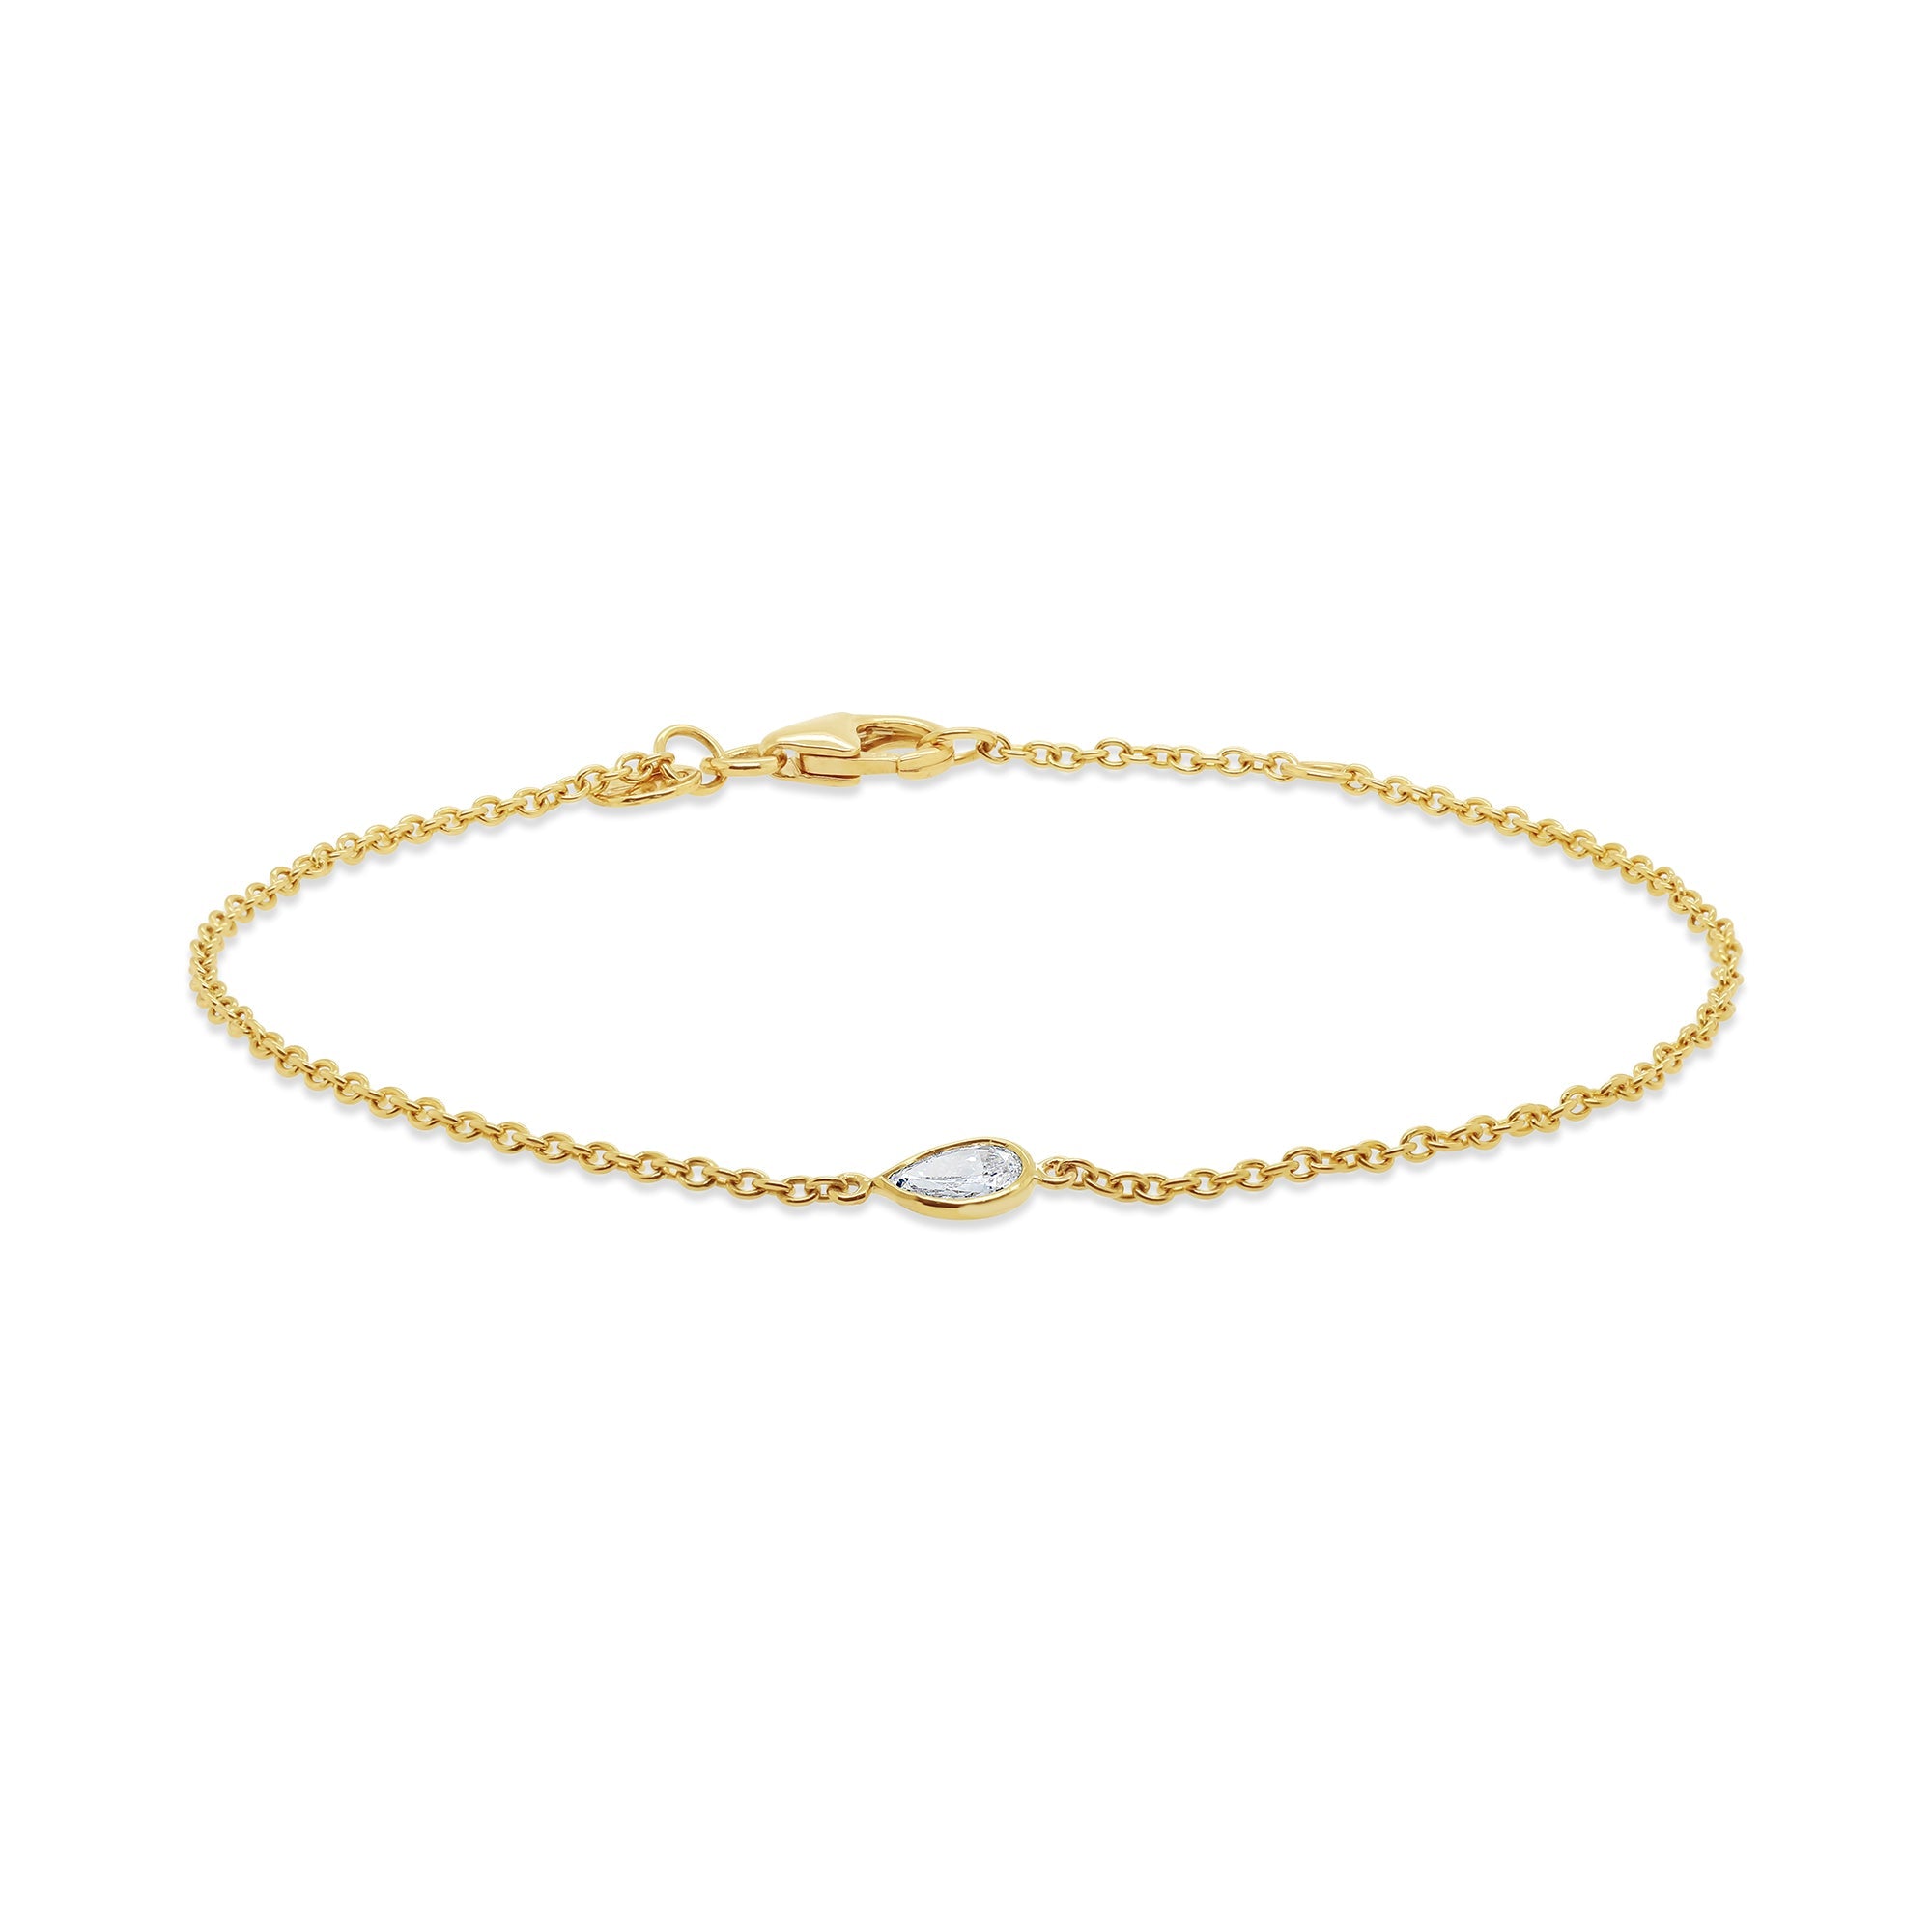 Yellow gold and pear shaped diamond bracelet